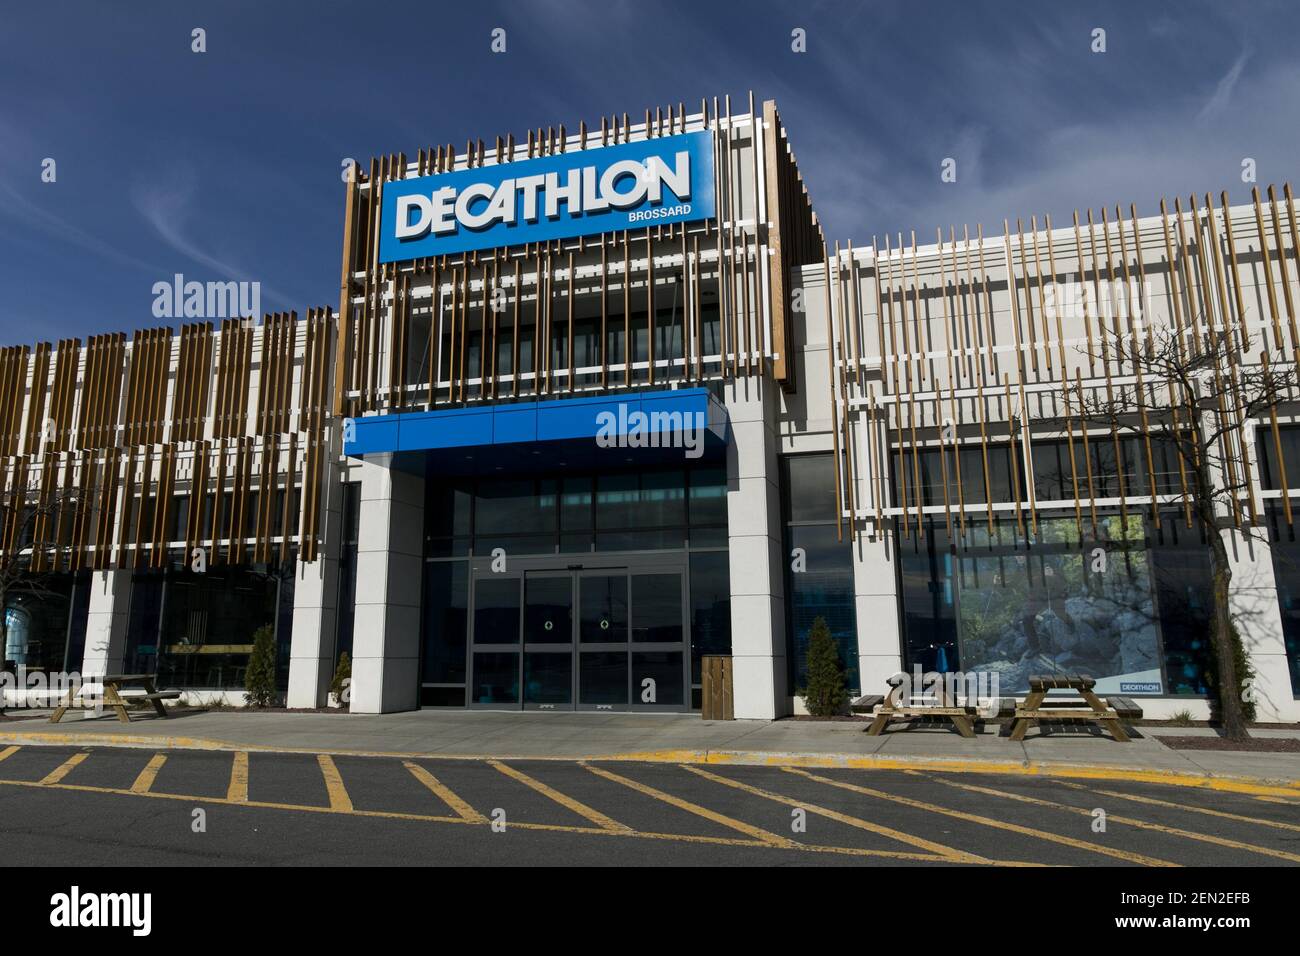 A logo sign outside of a Decathlon retail store location in Brossard,  Quebec, Canada, on April 23, 2019. (Photo by Kristoffer Tripplaar/Sipa USA  Stock Photo - Alamy